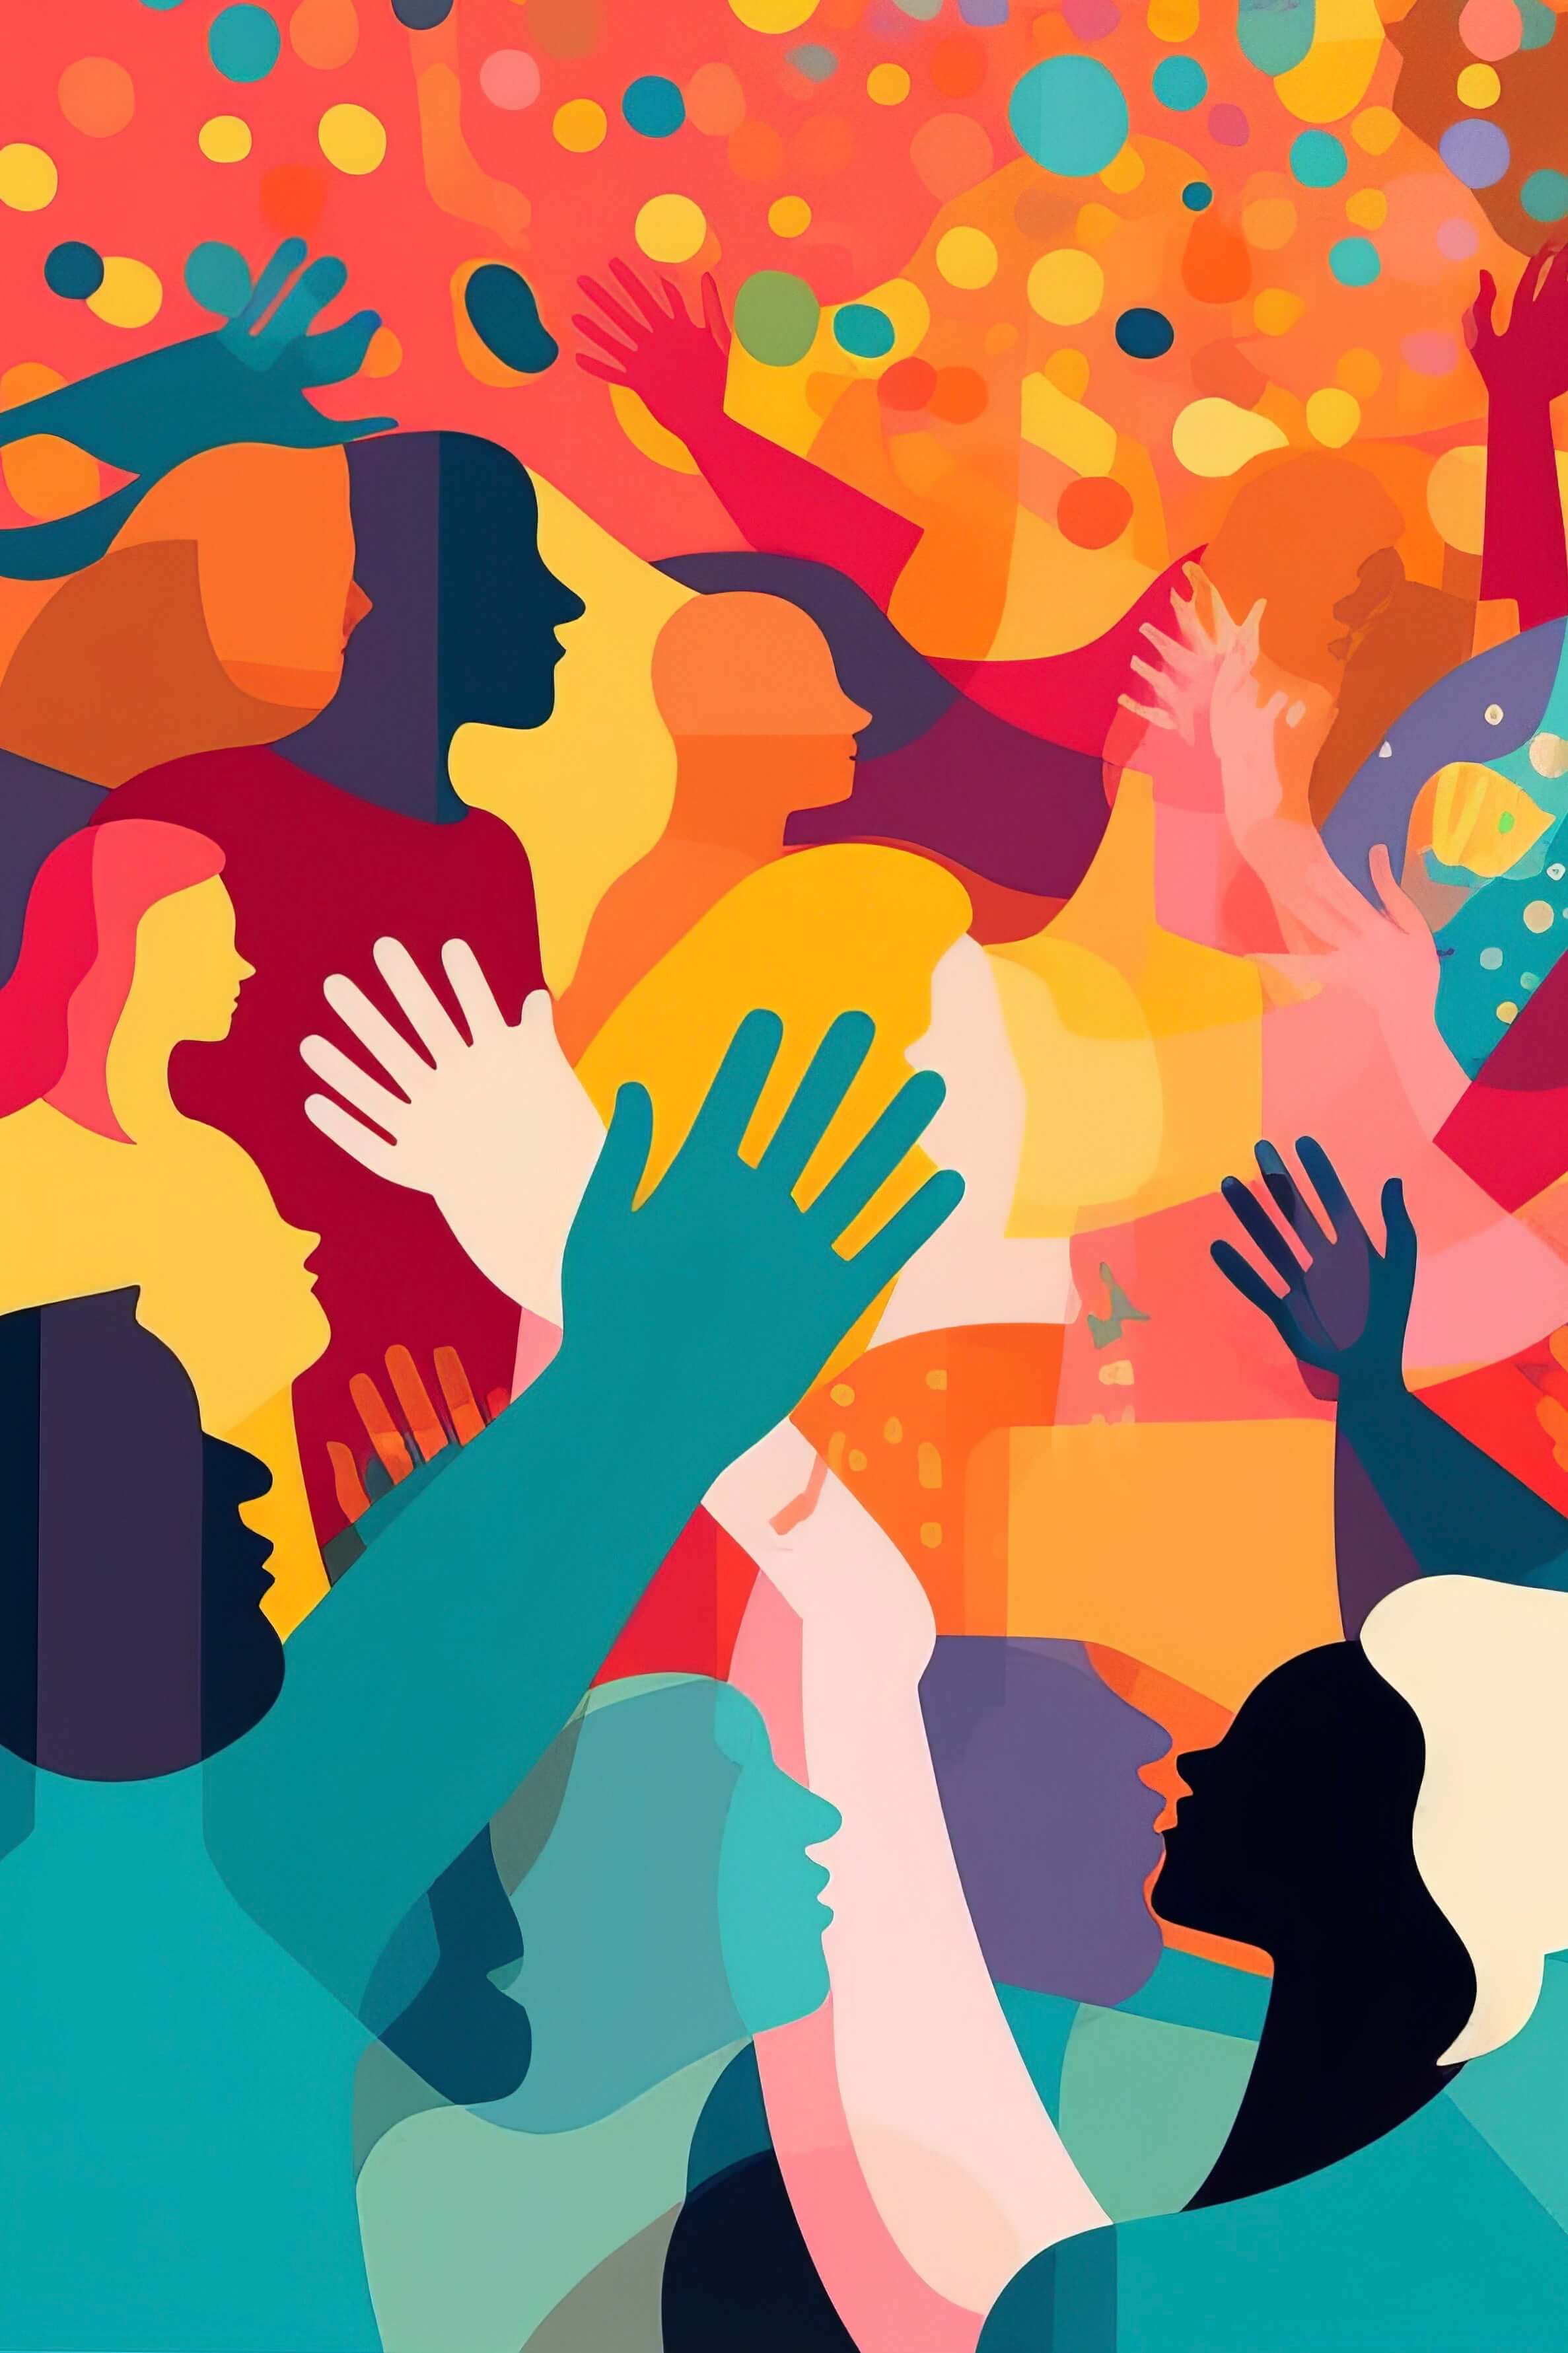 A colorful illustration of people raising their hands in a crowd